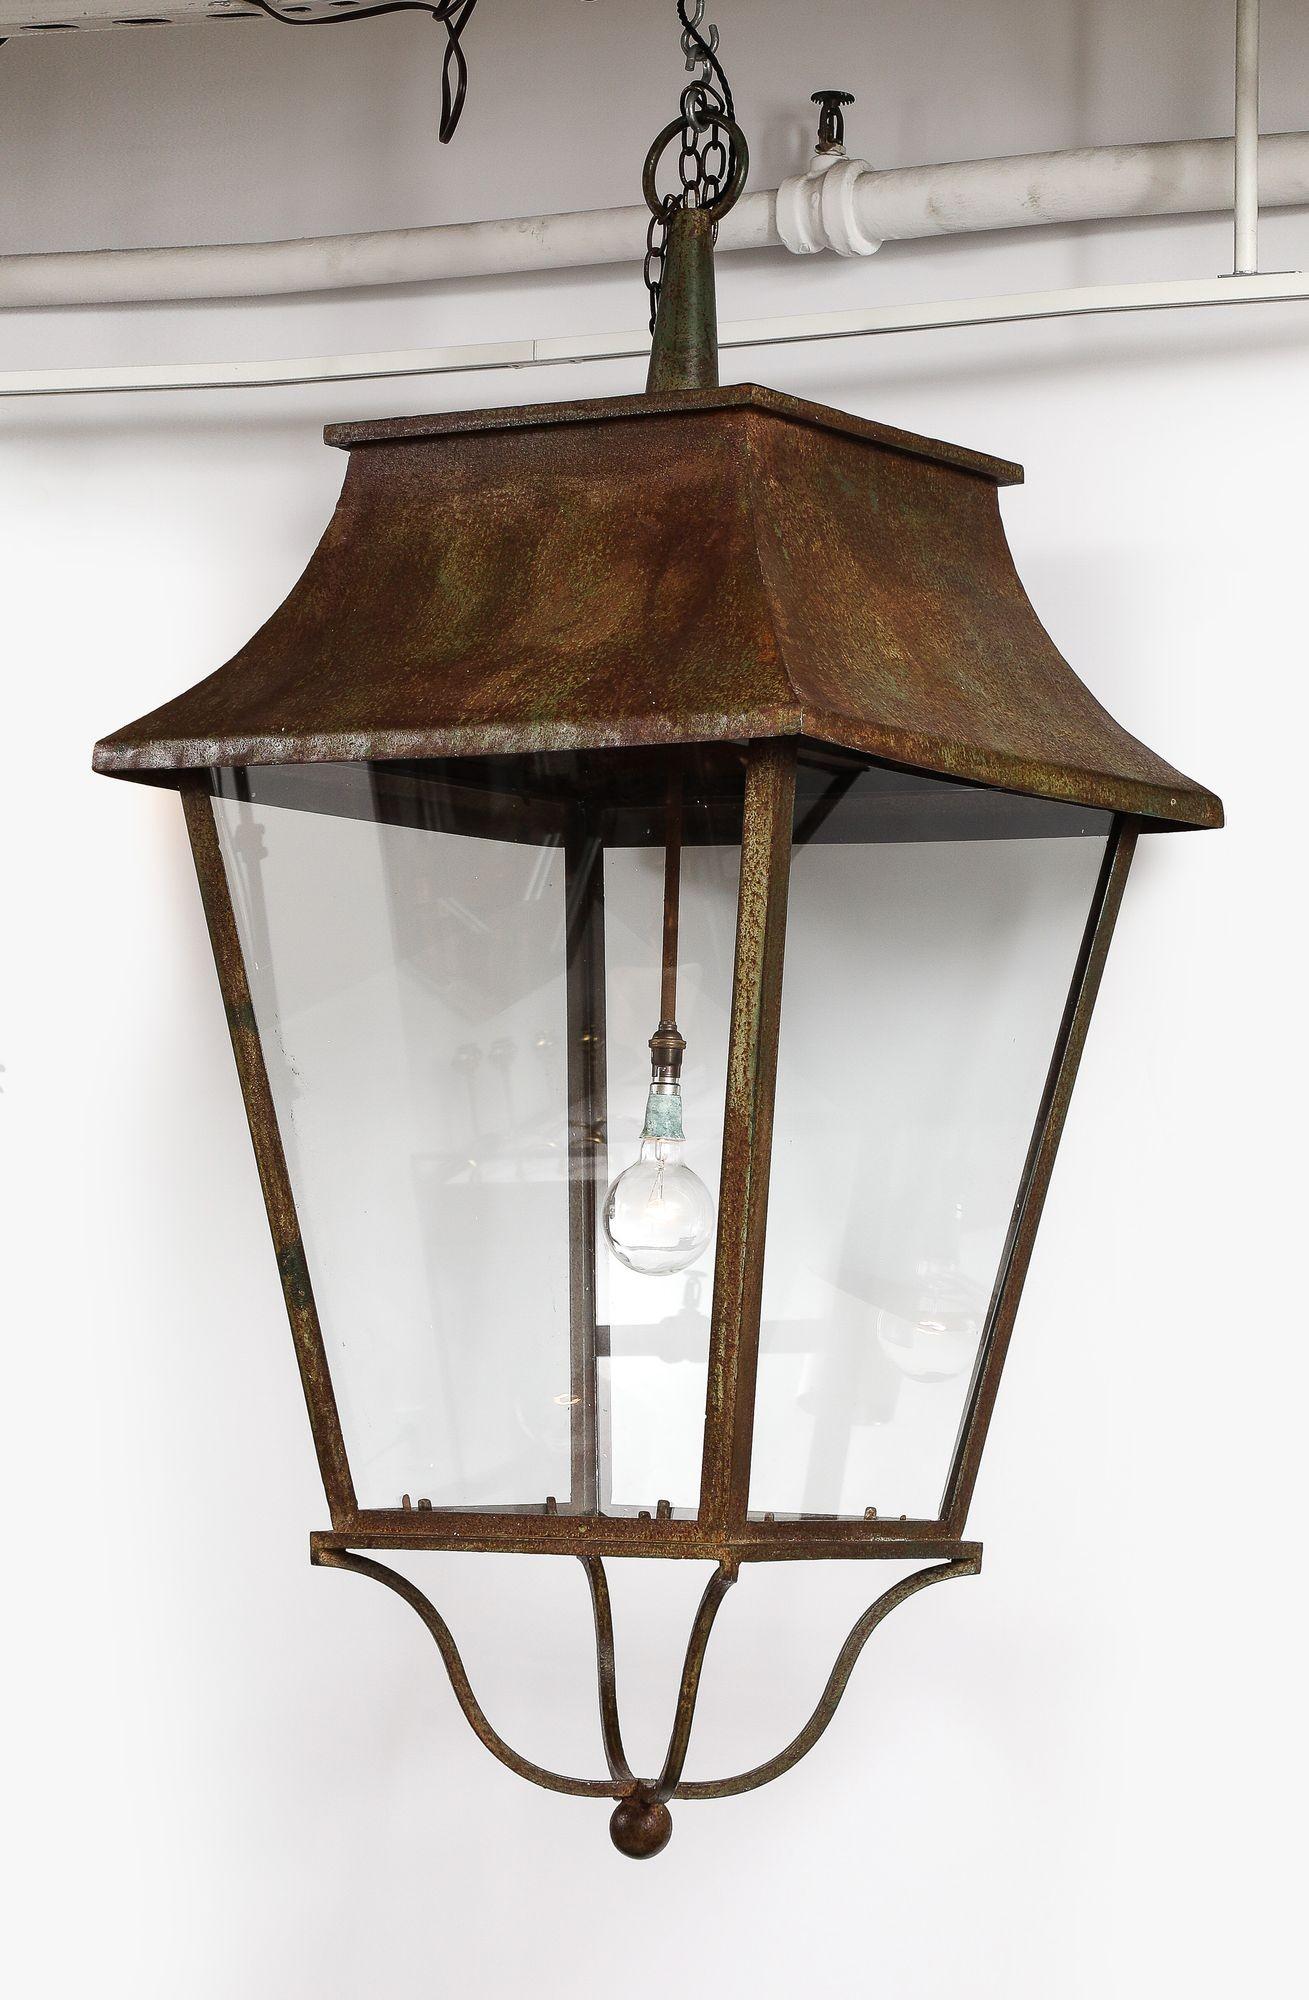 A magnificently scaled English country house hall or stable lantern in patinated iron with integral hanging loop above curving hood and glazed, canted sides, with shaped iron base ending in a center ball. Electrified with central hanging fixture.